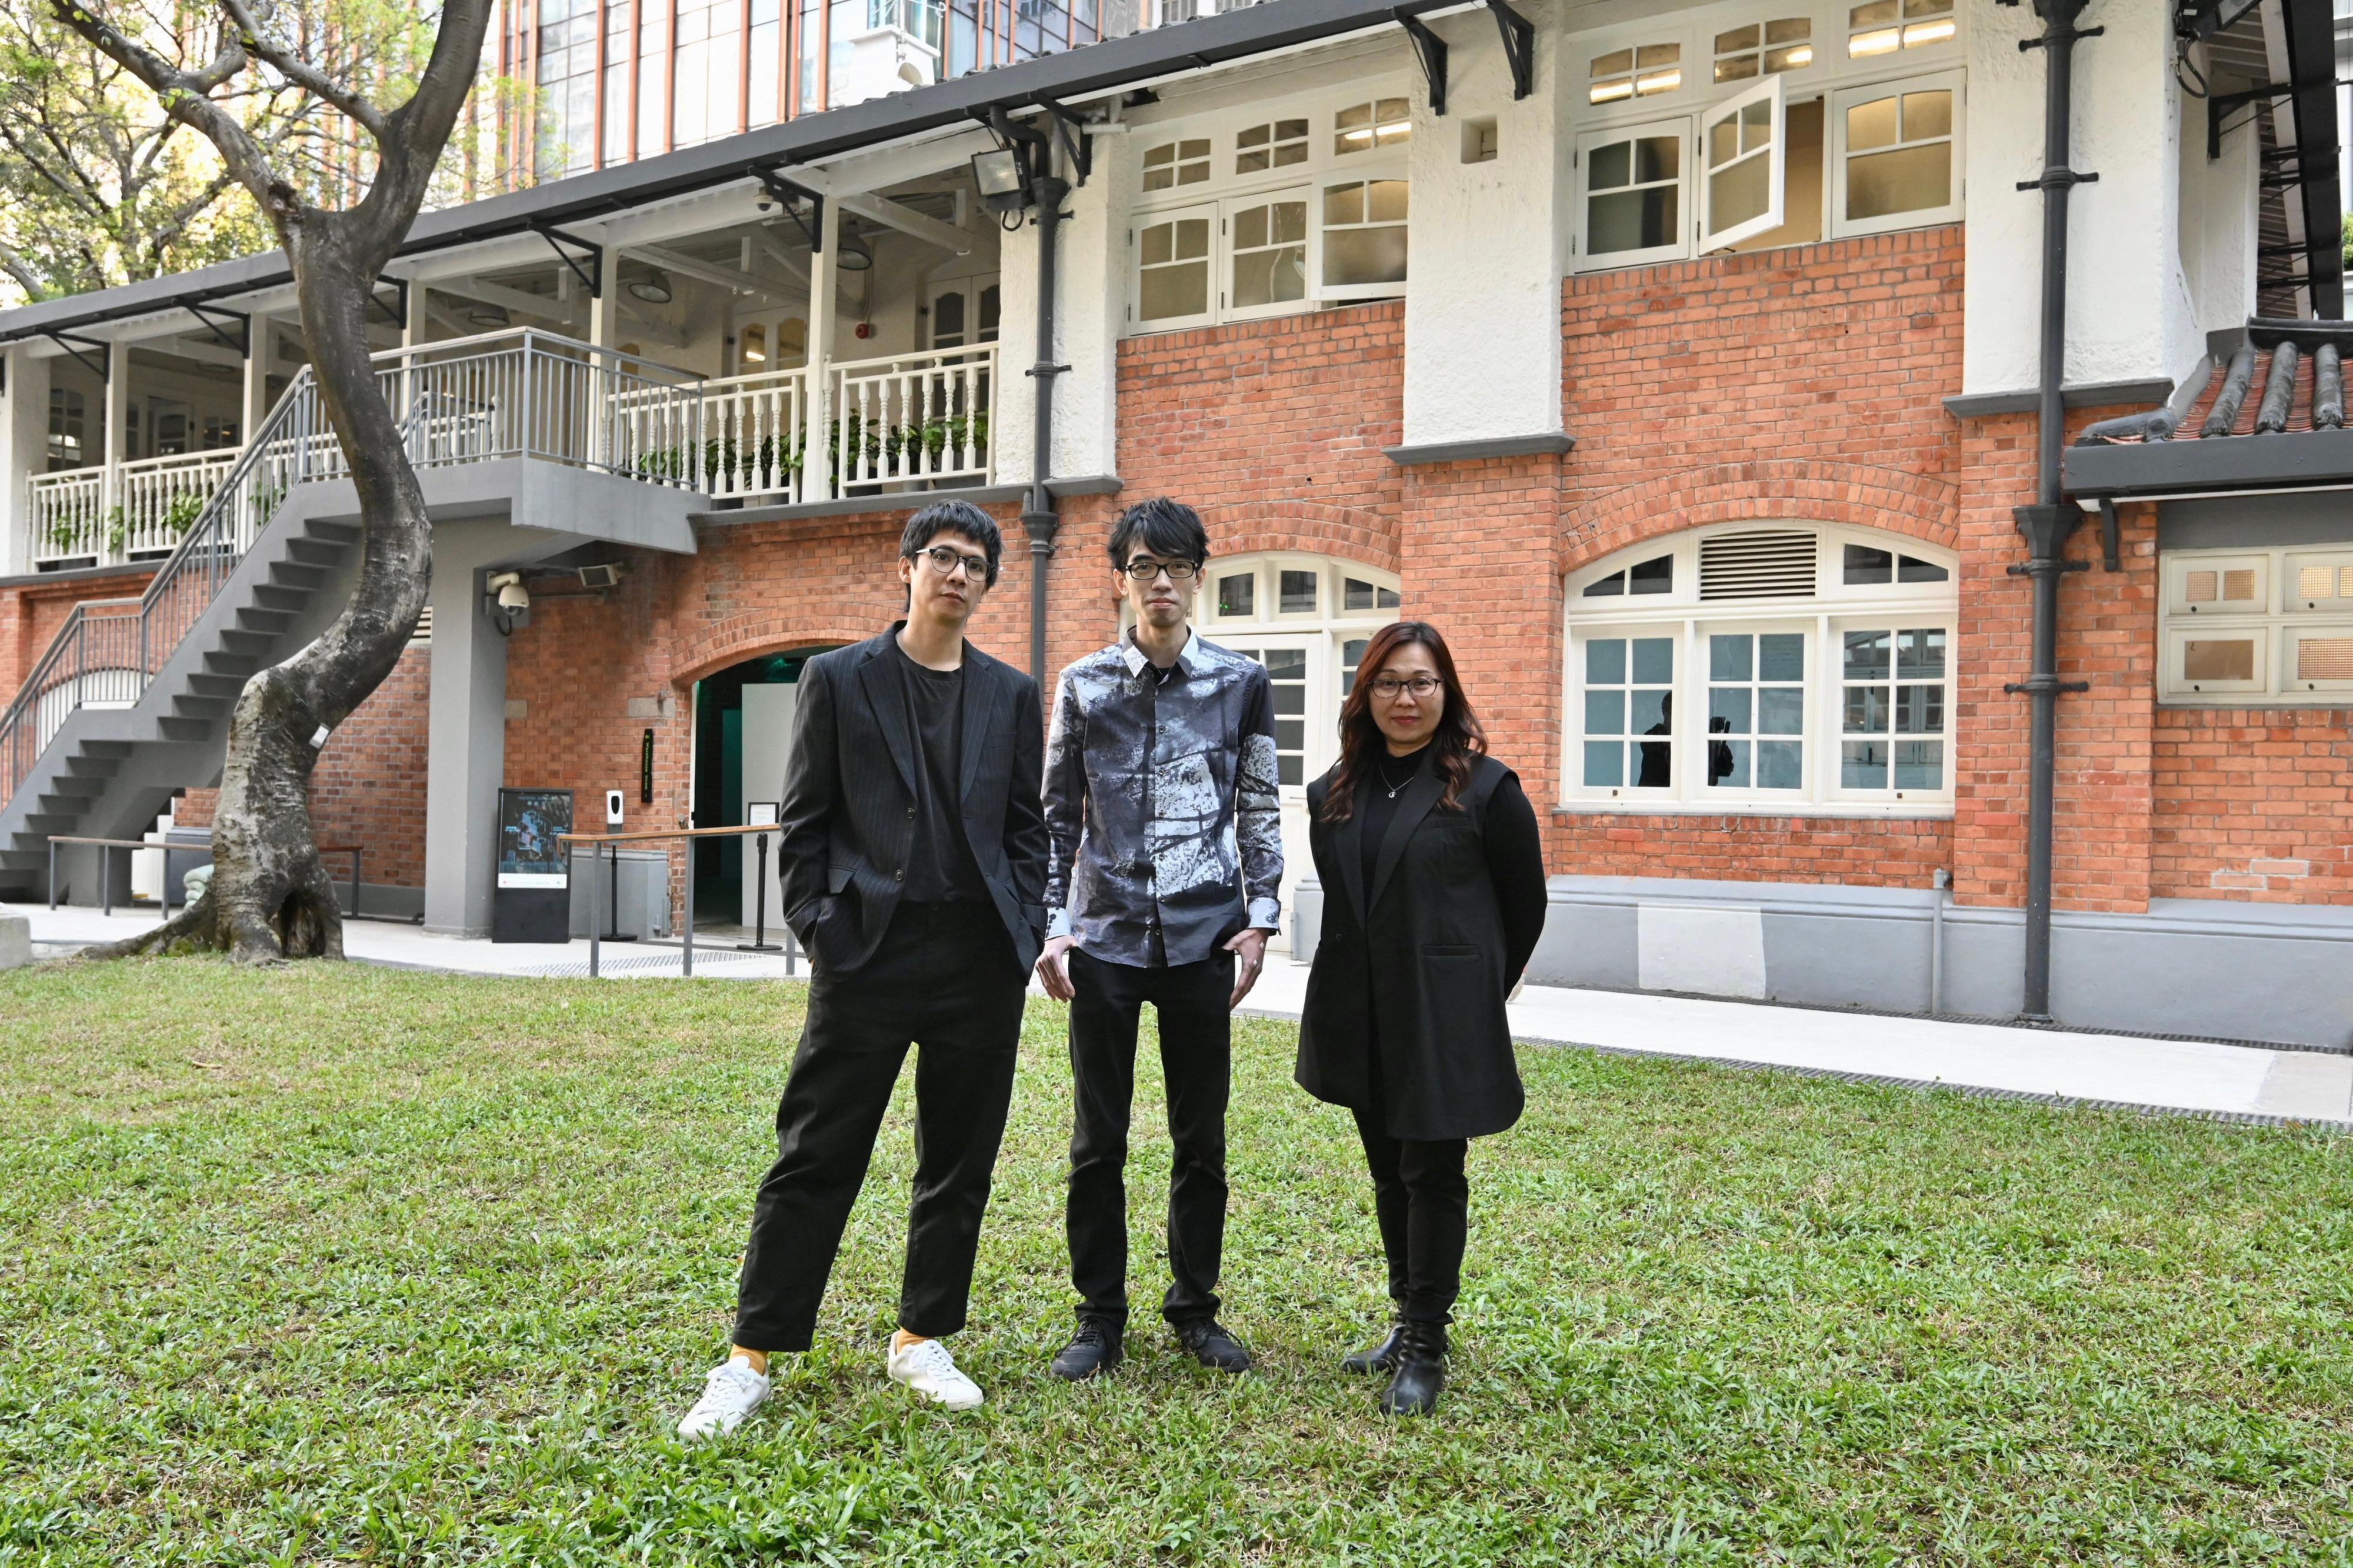 Two new exhibitions of "Oi! Spotlight" launched by the Oil Street Art Space (Oi!) will open to the public from tomorrow (March 1) to July 30. Photo shows the Curator of Oi!, Ms Joan Chung (right), participating artists Nadim Abbas (left) and Choi Sai-ho (centre).